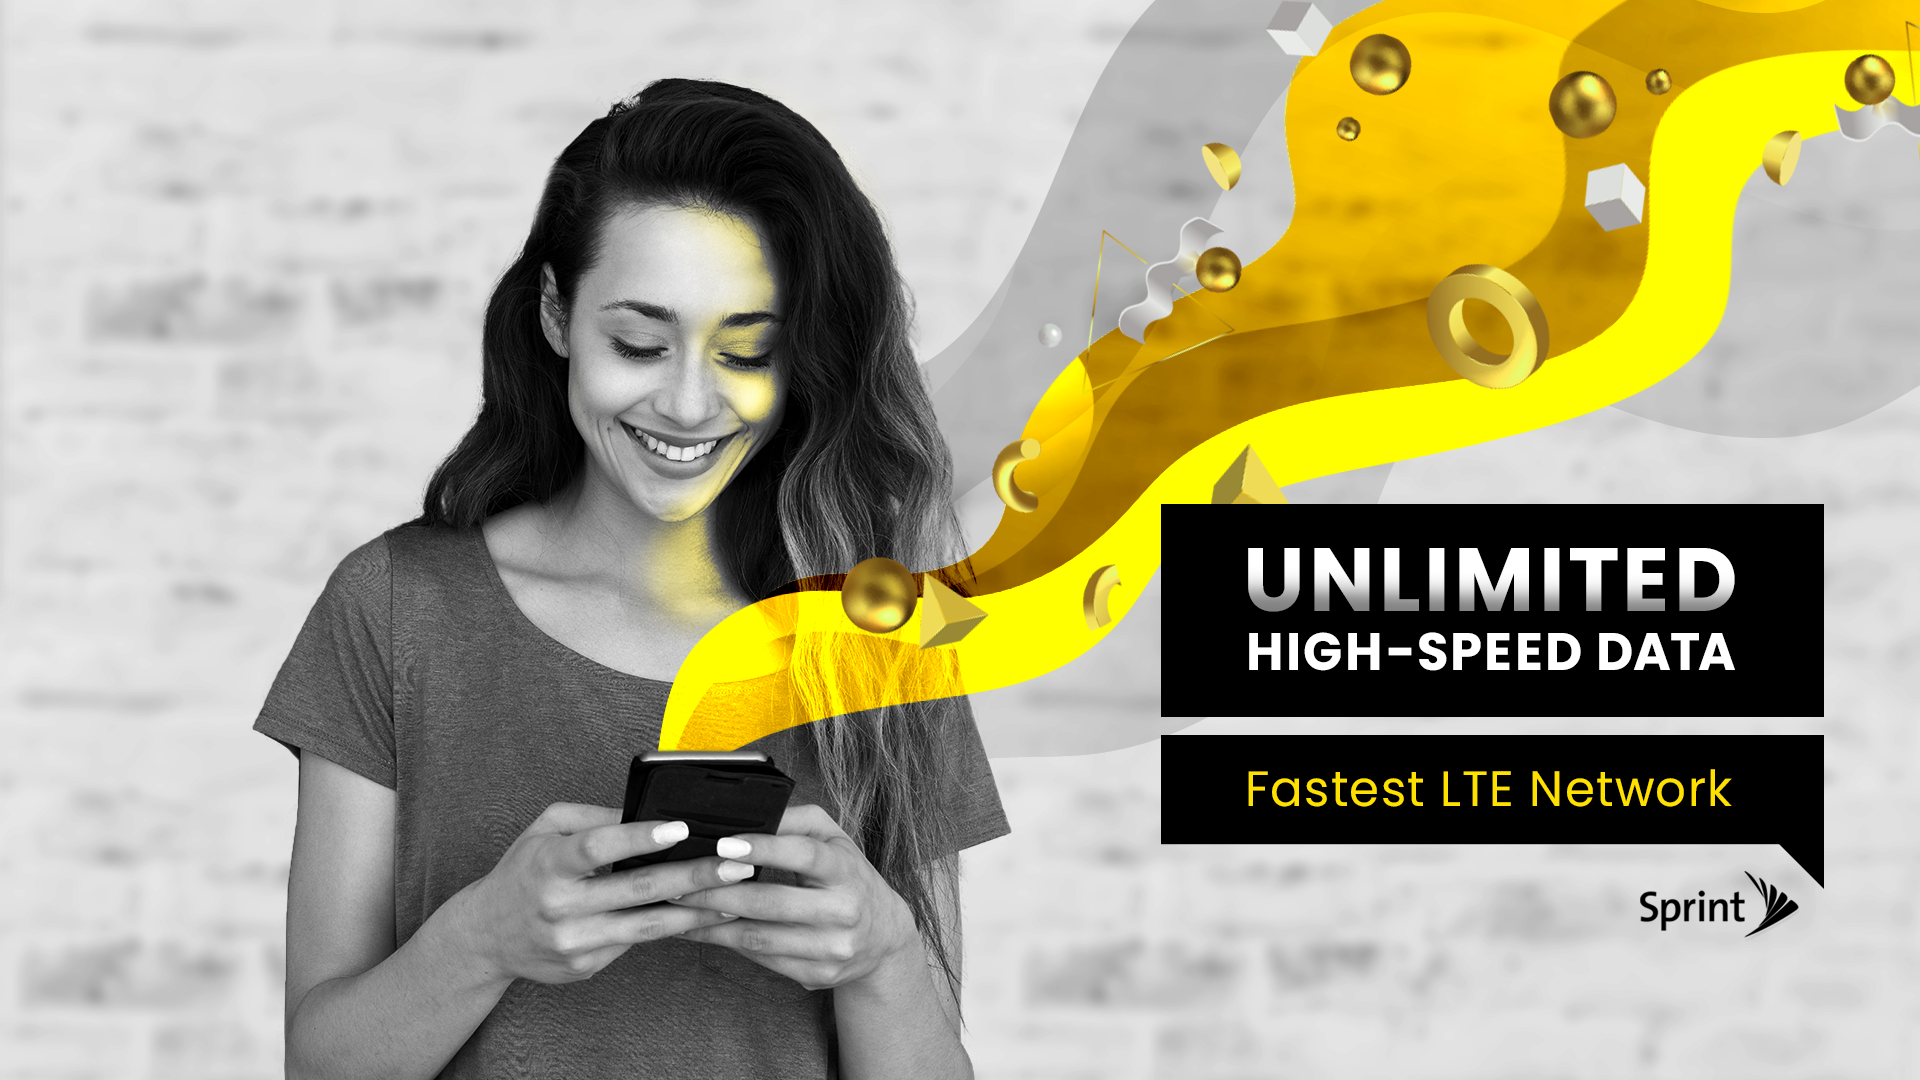 Sprint_Unlimited_Data__OfferPage_v003.png